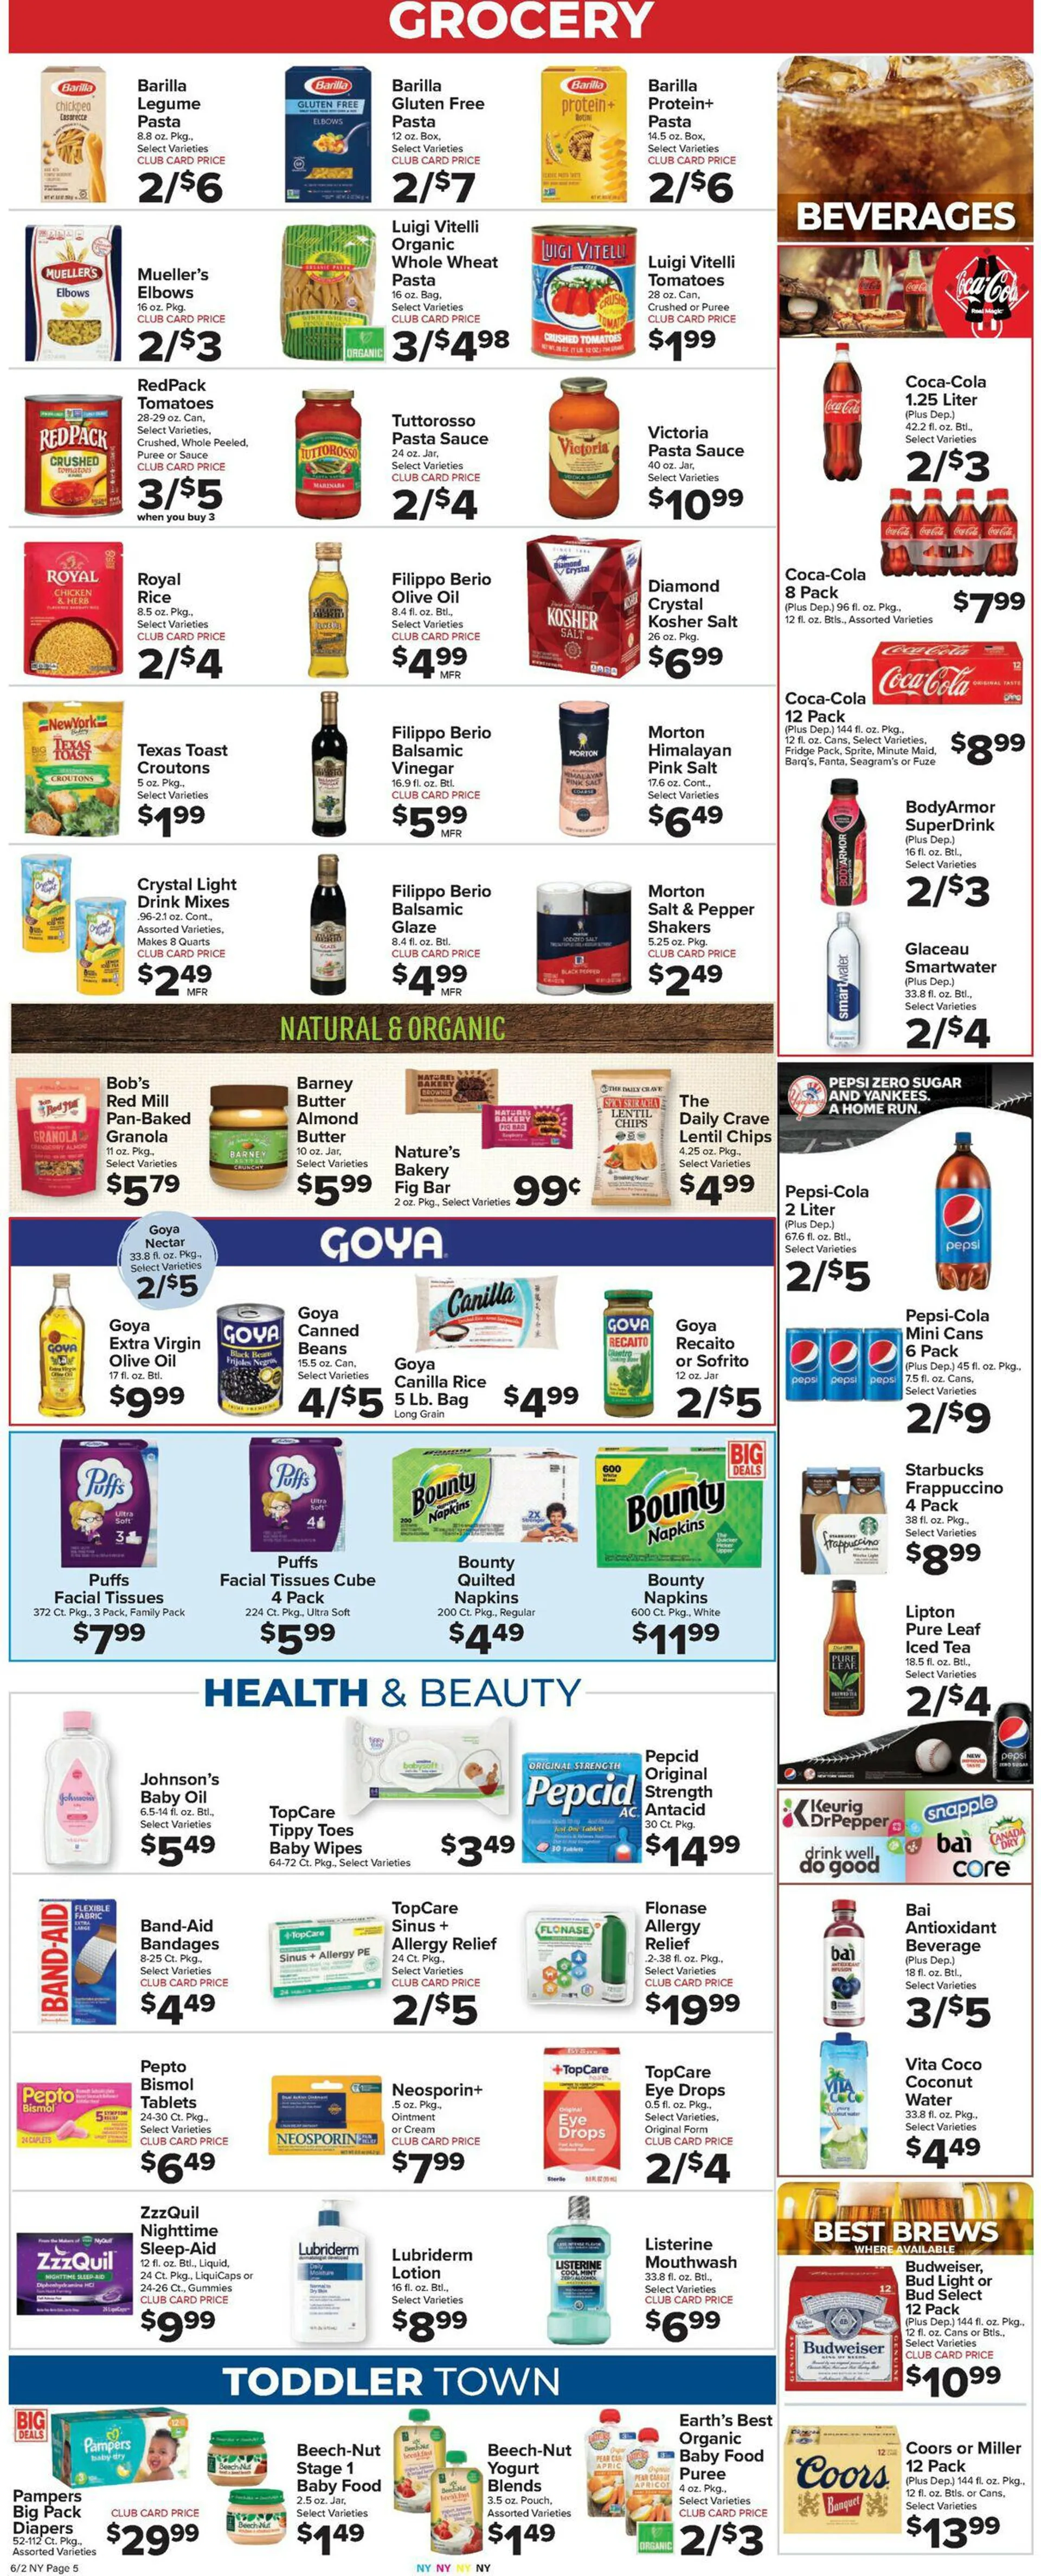 Foodtown Current weekly ad - 7